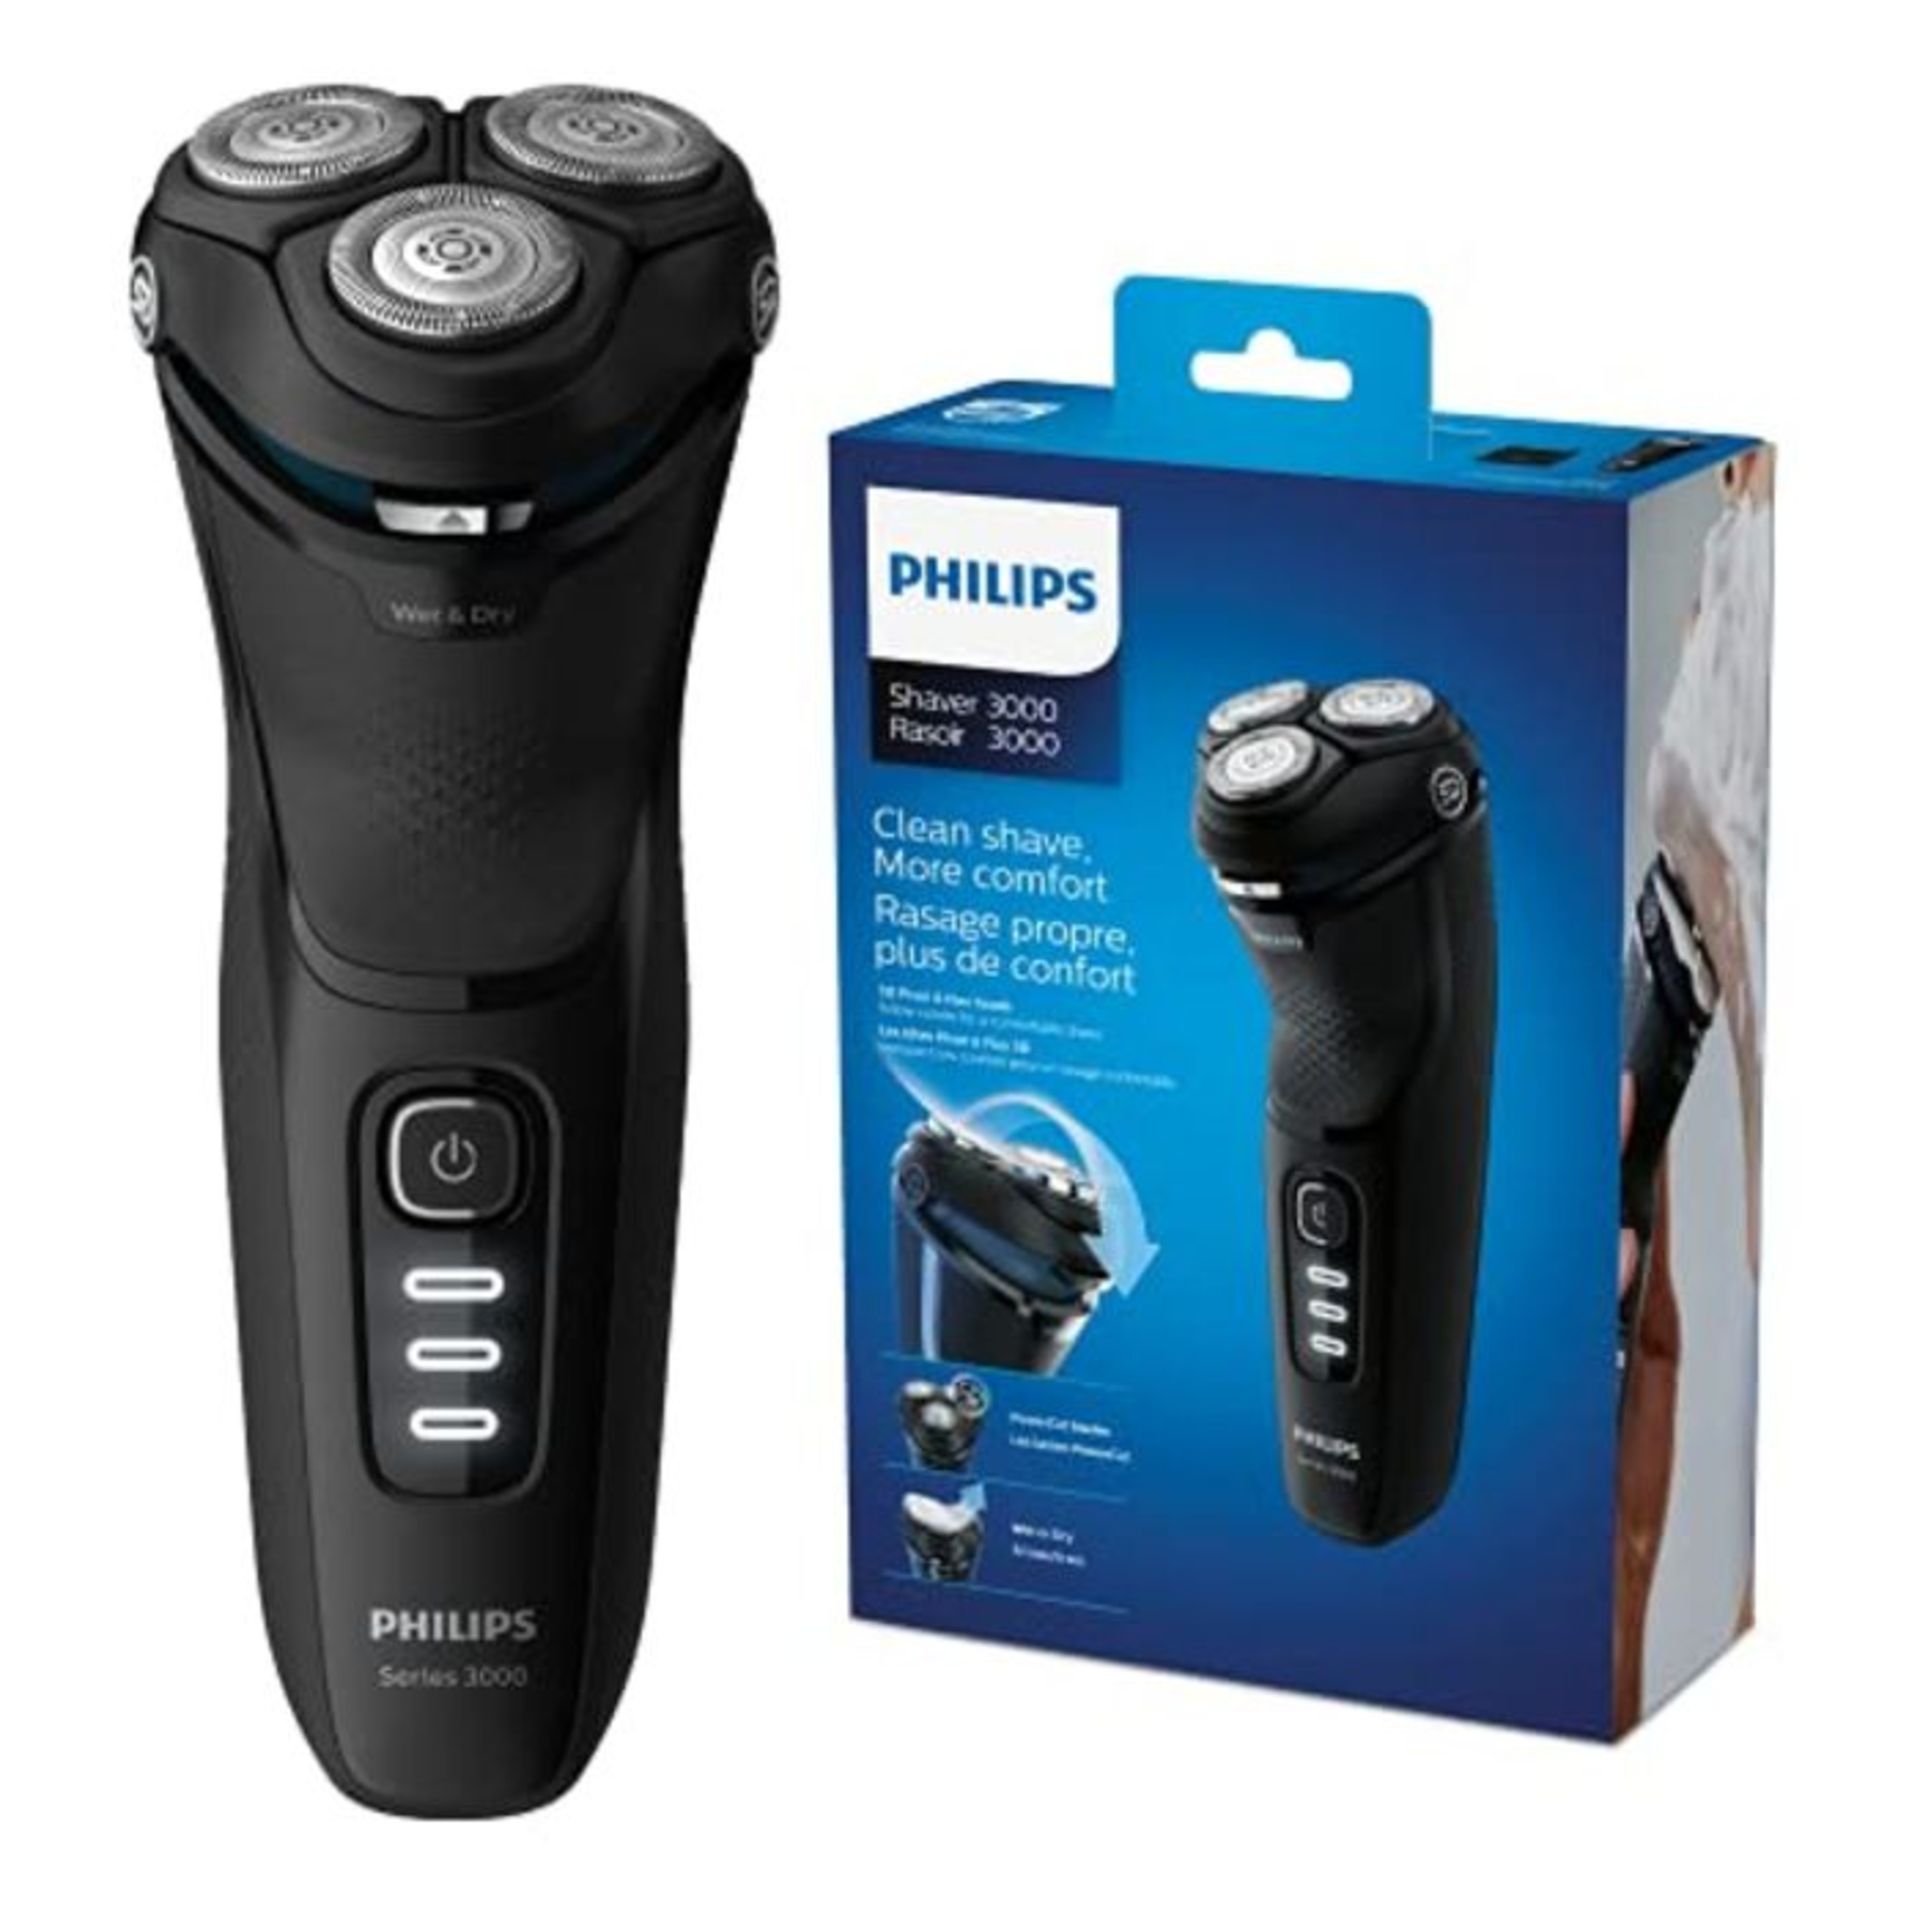 RRP £53.00 Philips Shaver Series 3000 with Powercut Blades, Wet & Dry Men's Electric Shaver with